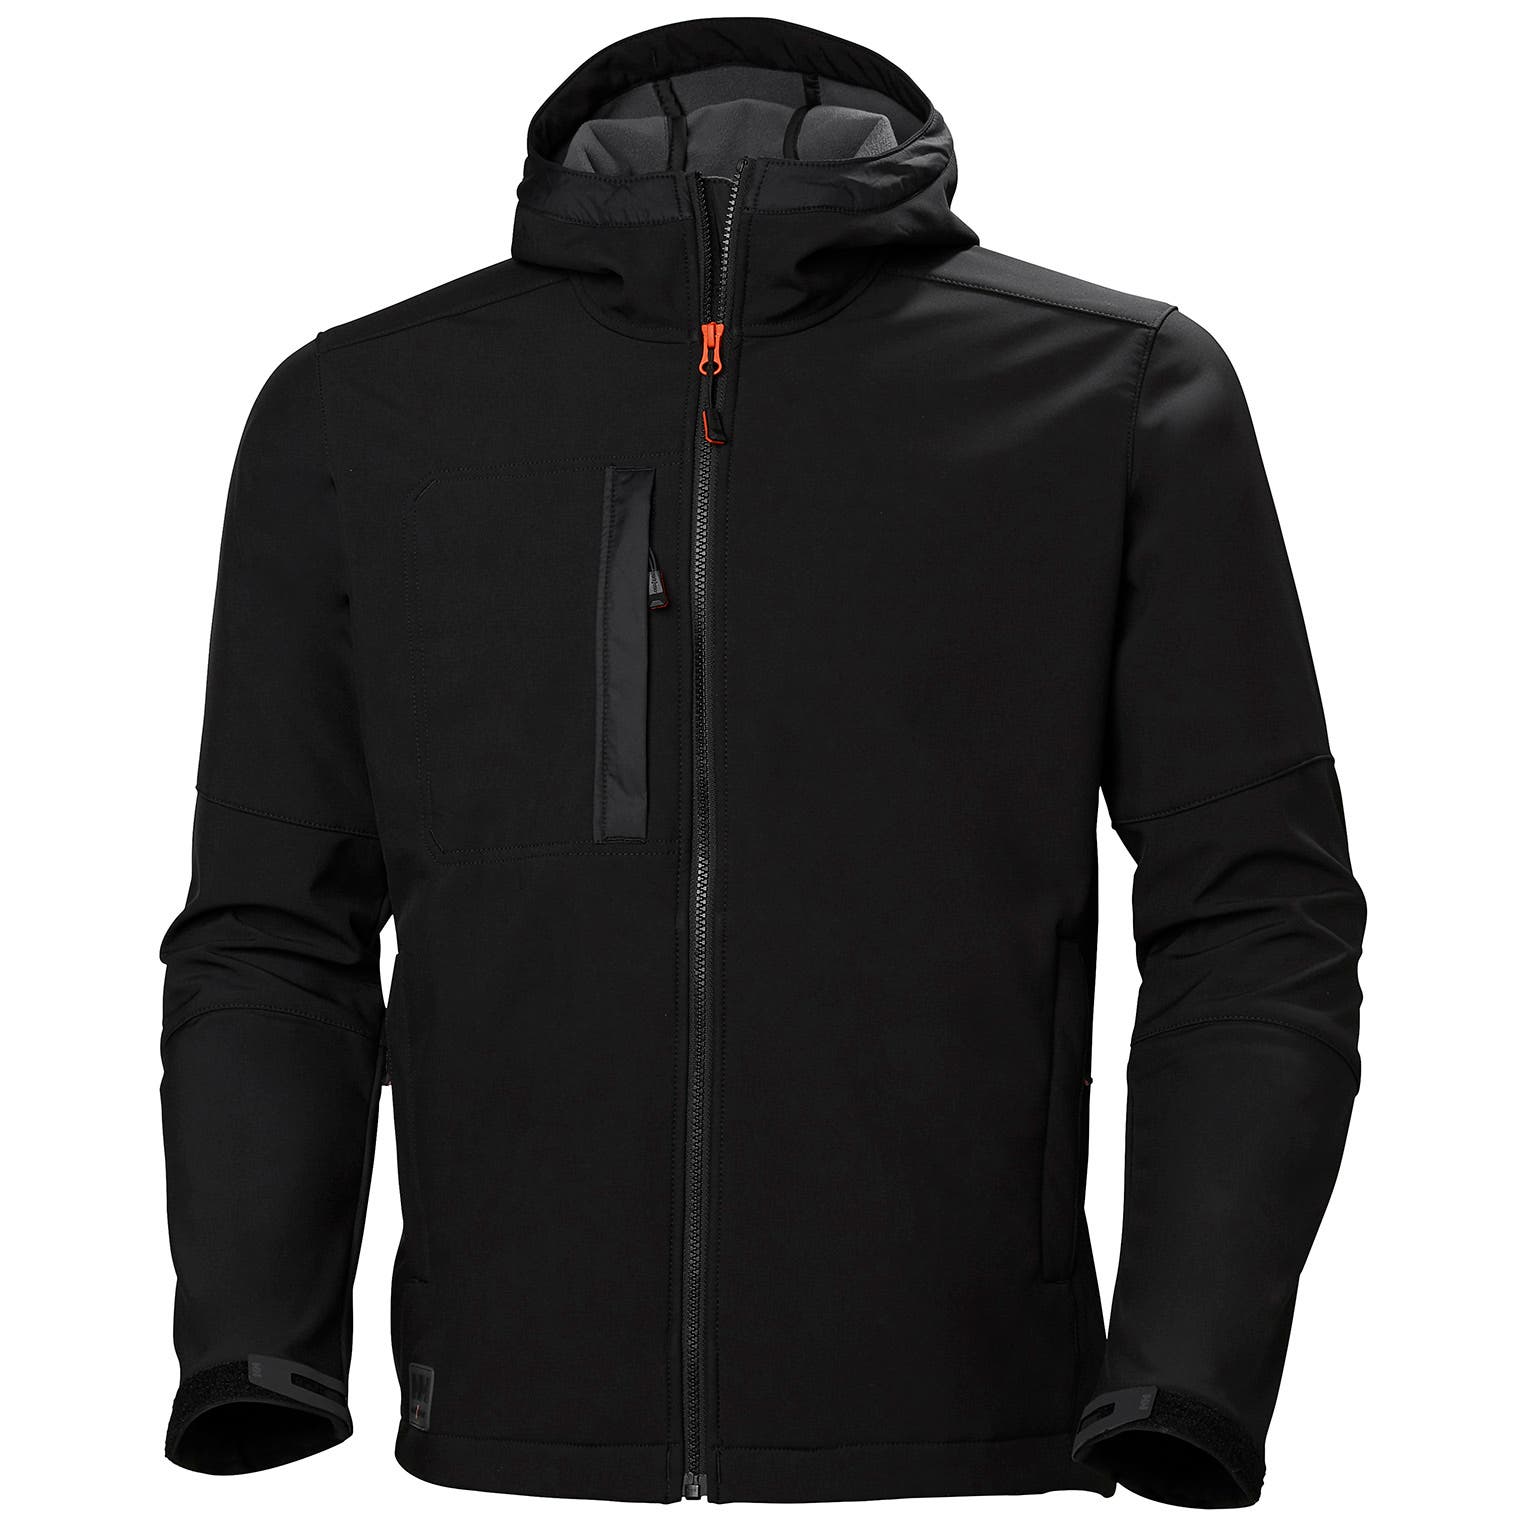 Helly Hansen Men's Kensington Hooded Softshell Jacket in Black from the front